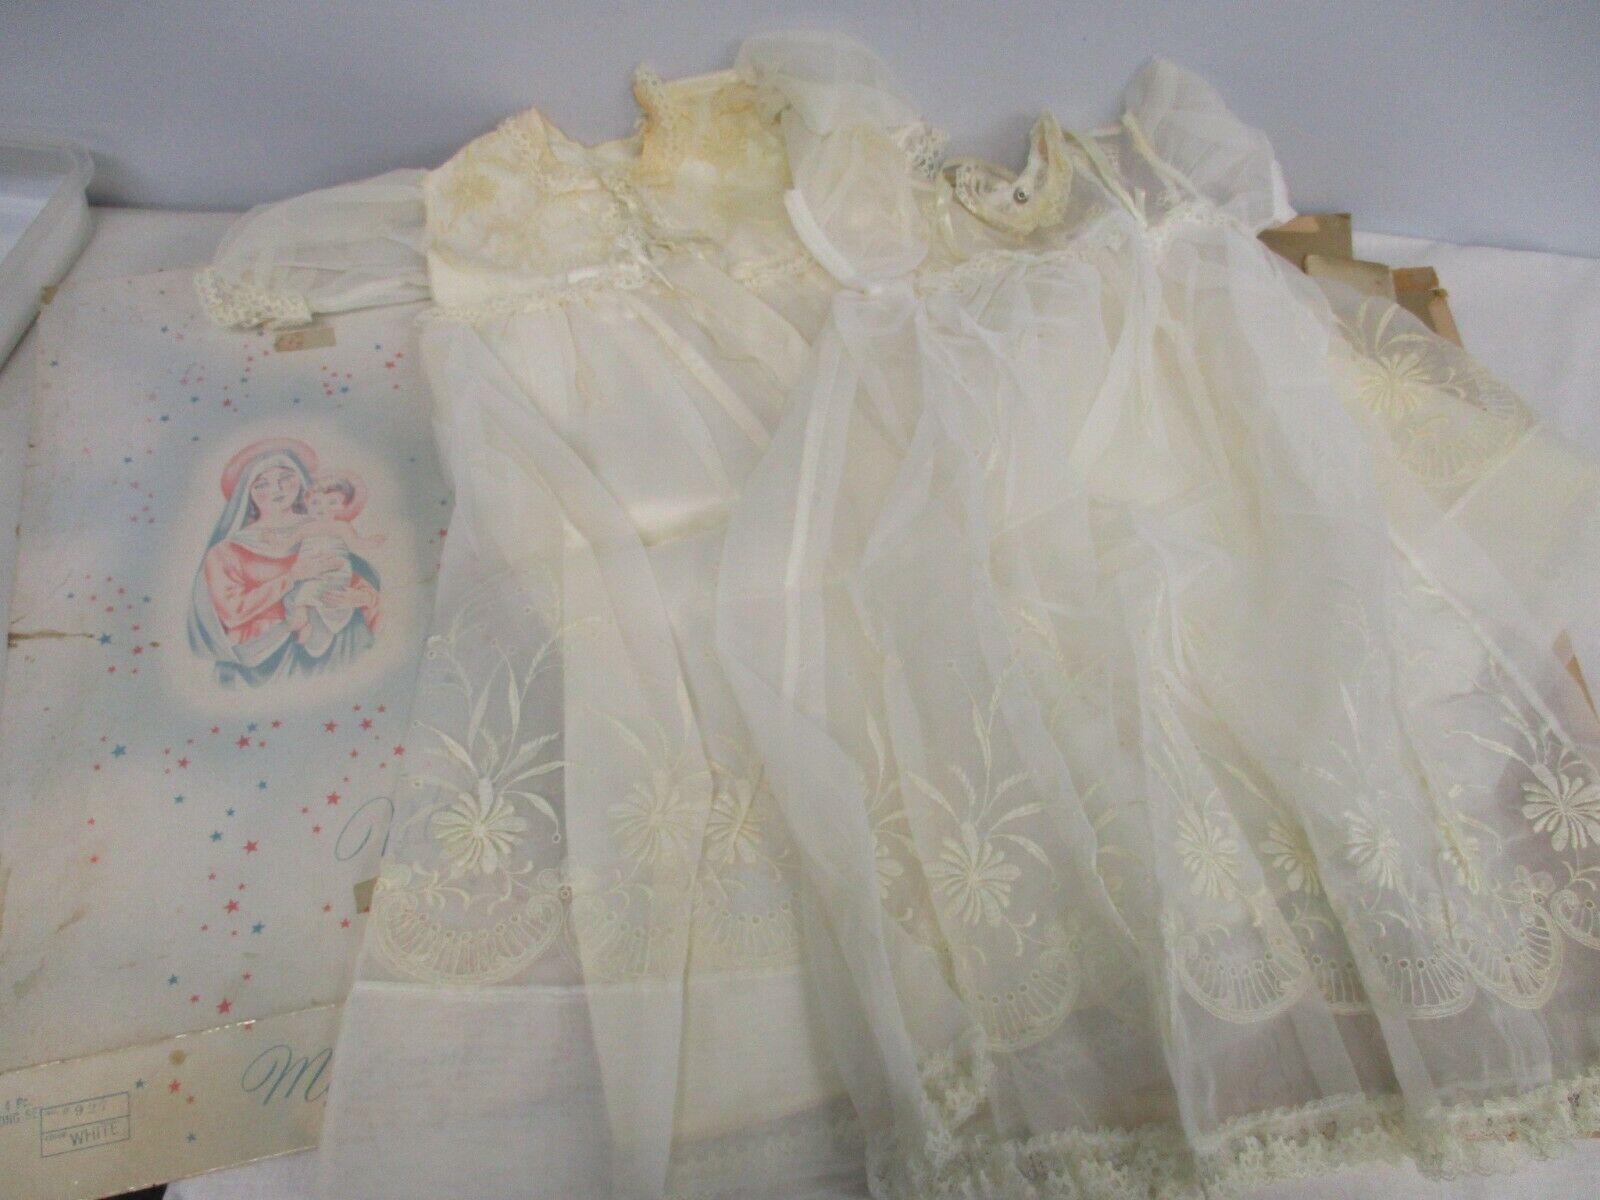 Vintage 1940s 4 Piece Baby Christening Set With Gown & Robe ~ Embroidered & Lace